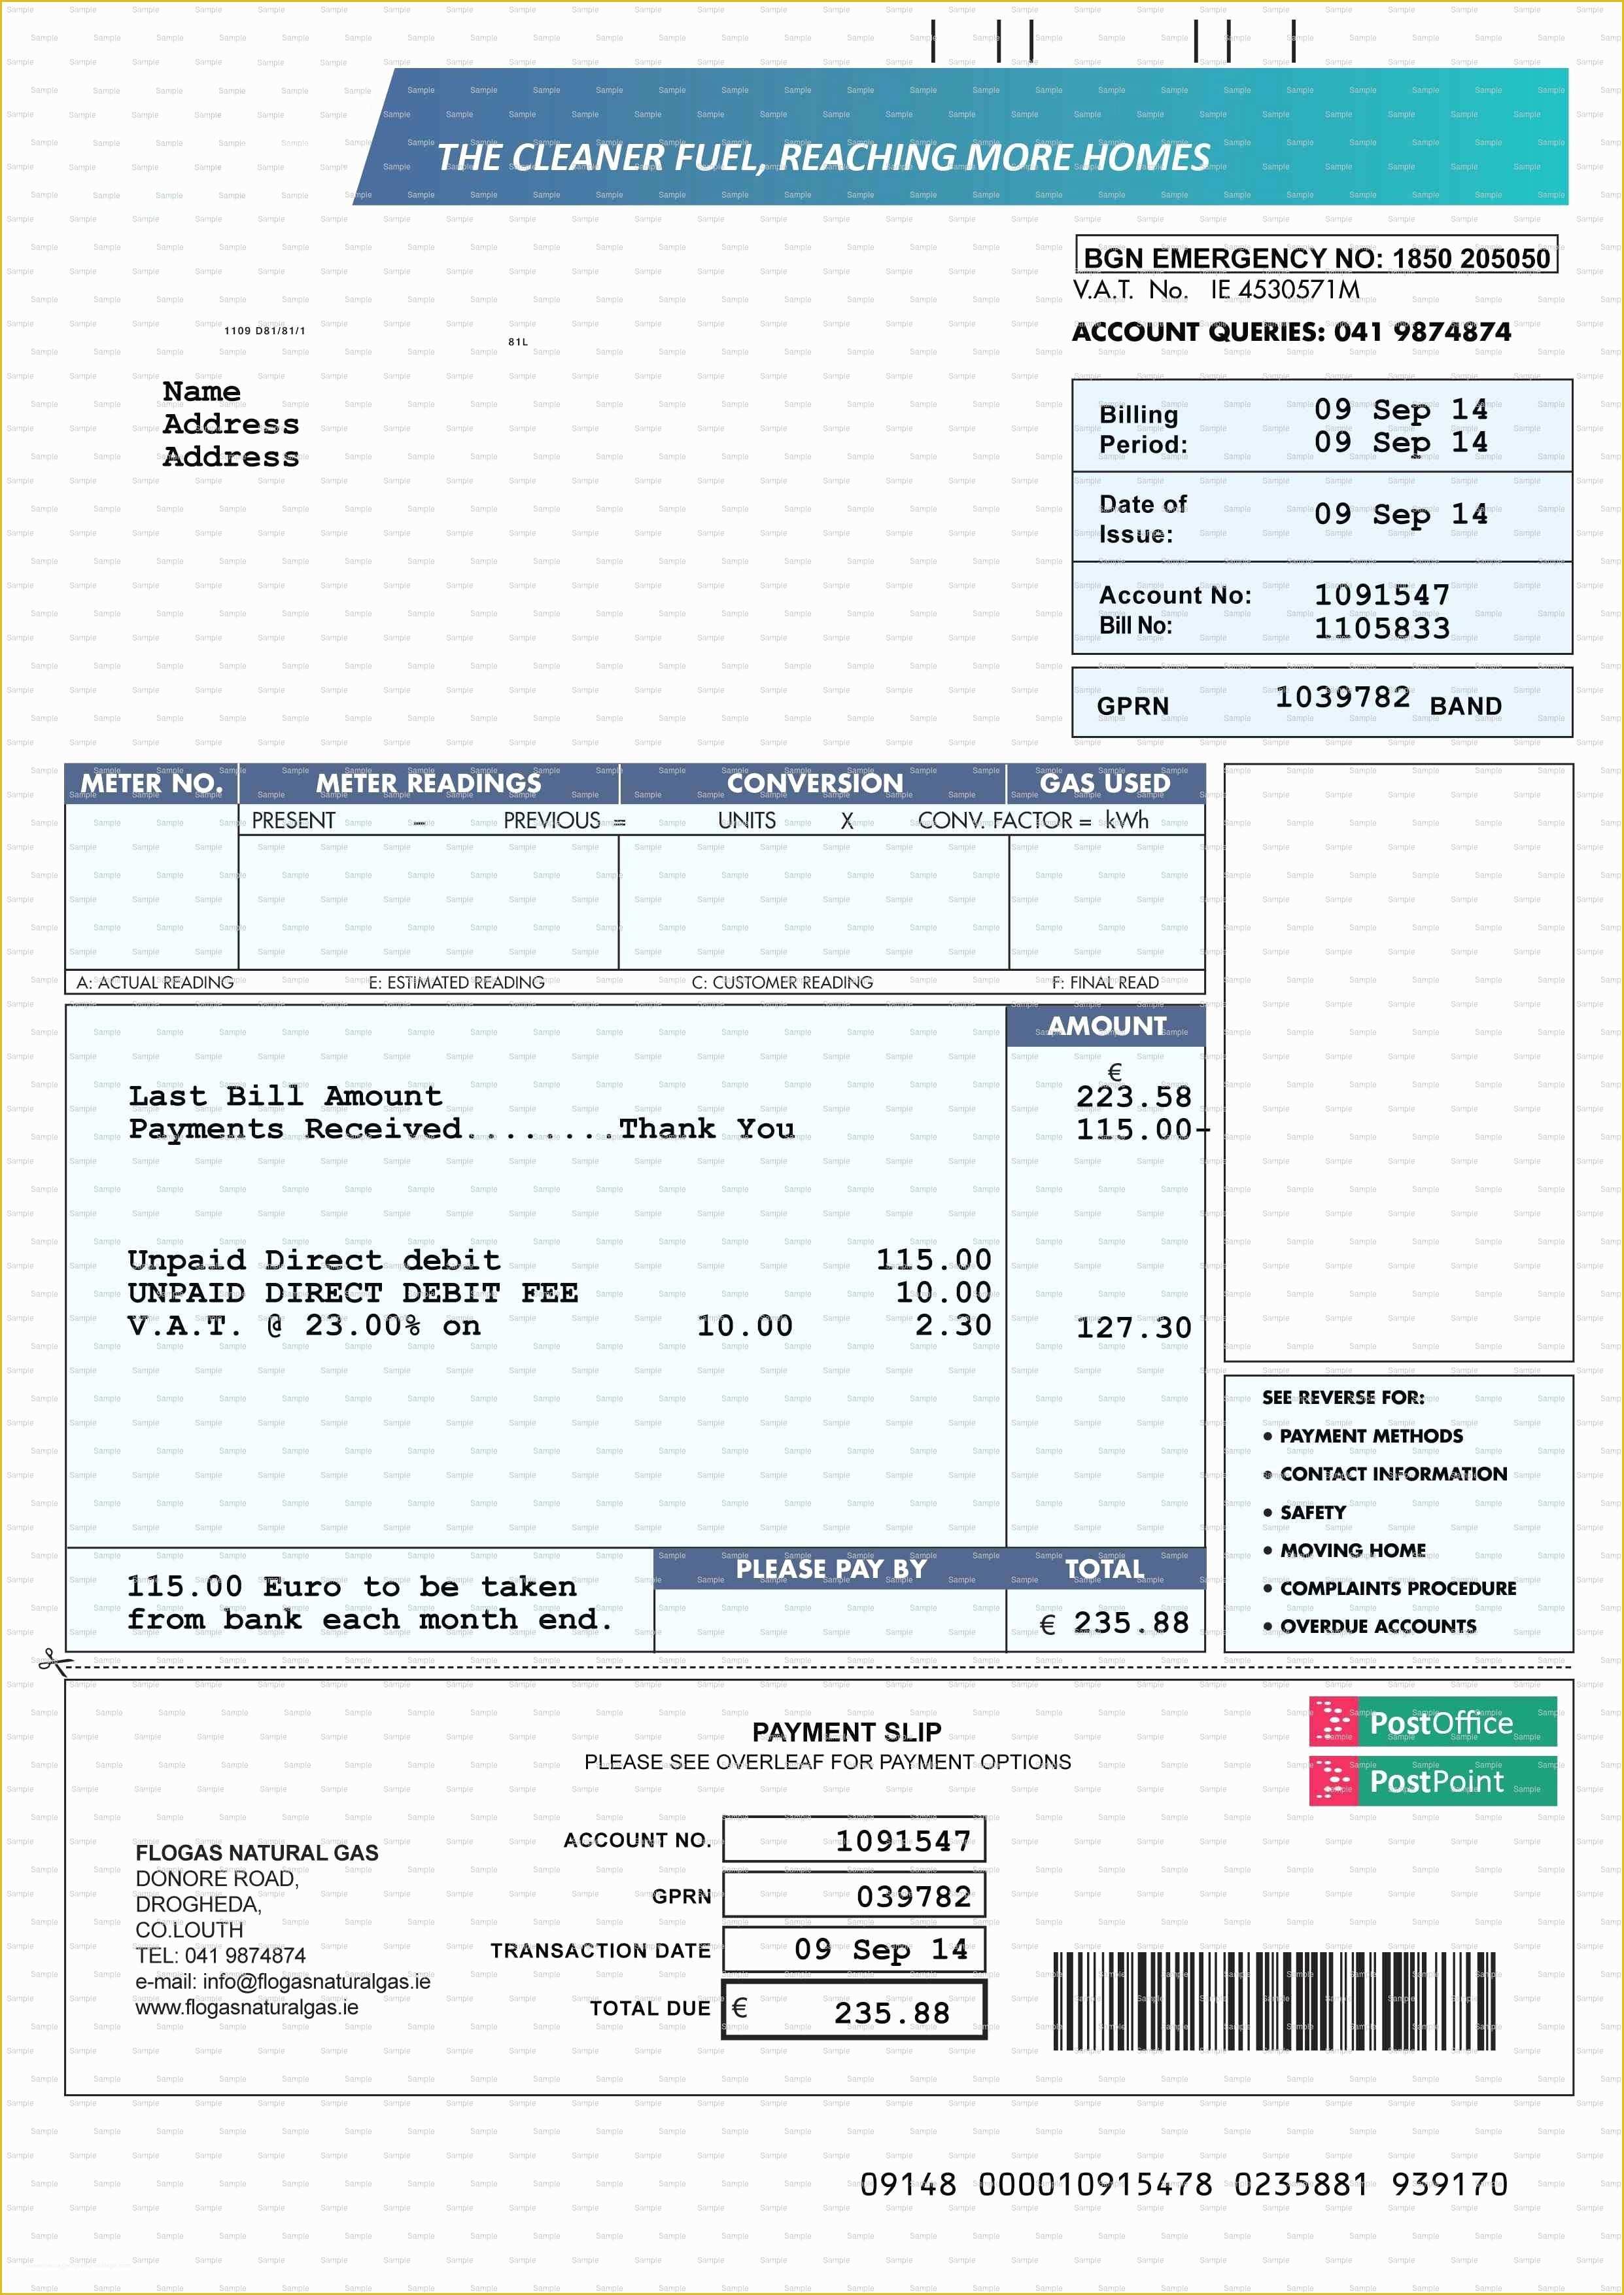 Fake Utility Bill Template Free Of S7p24bpx1flxsmioametnr96 Utility Billmplate Free Download